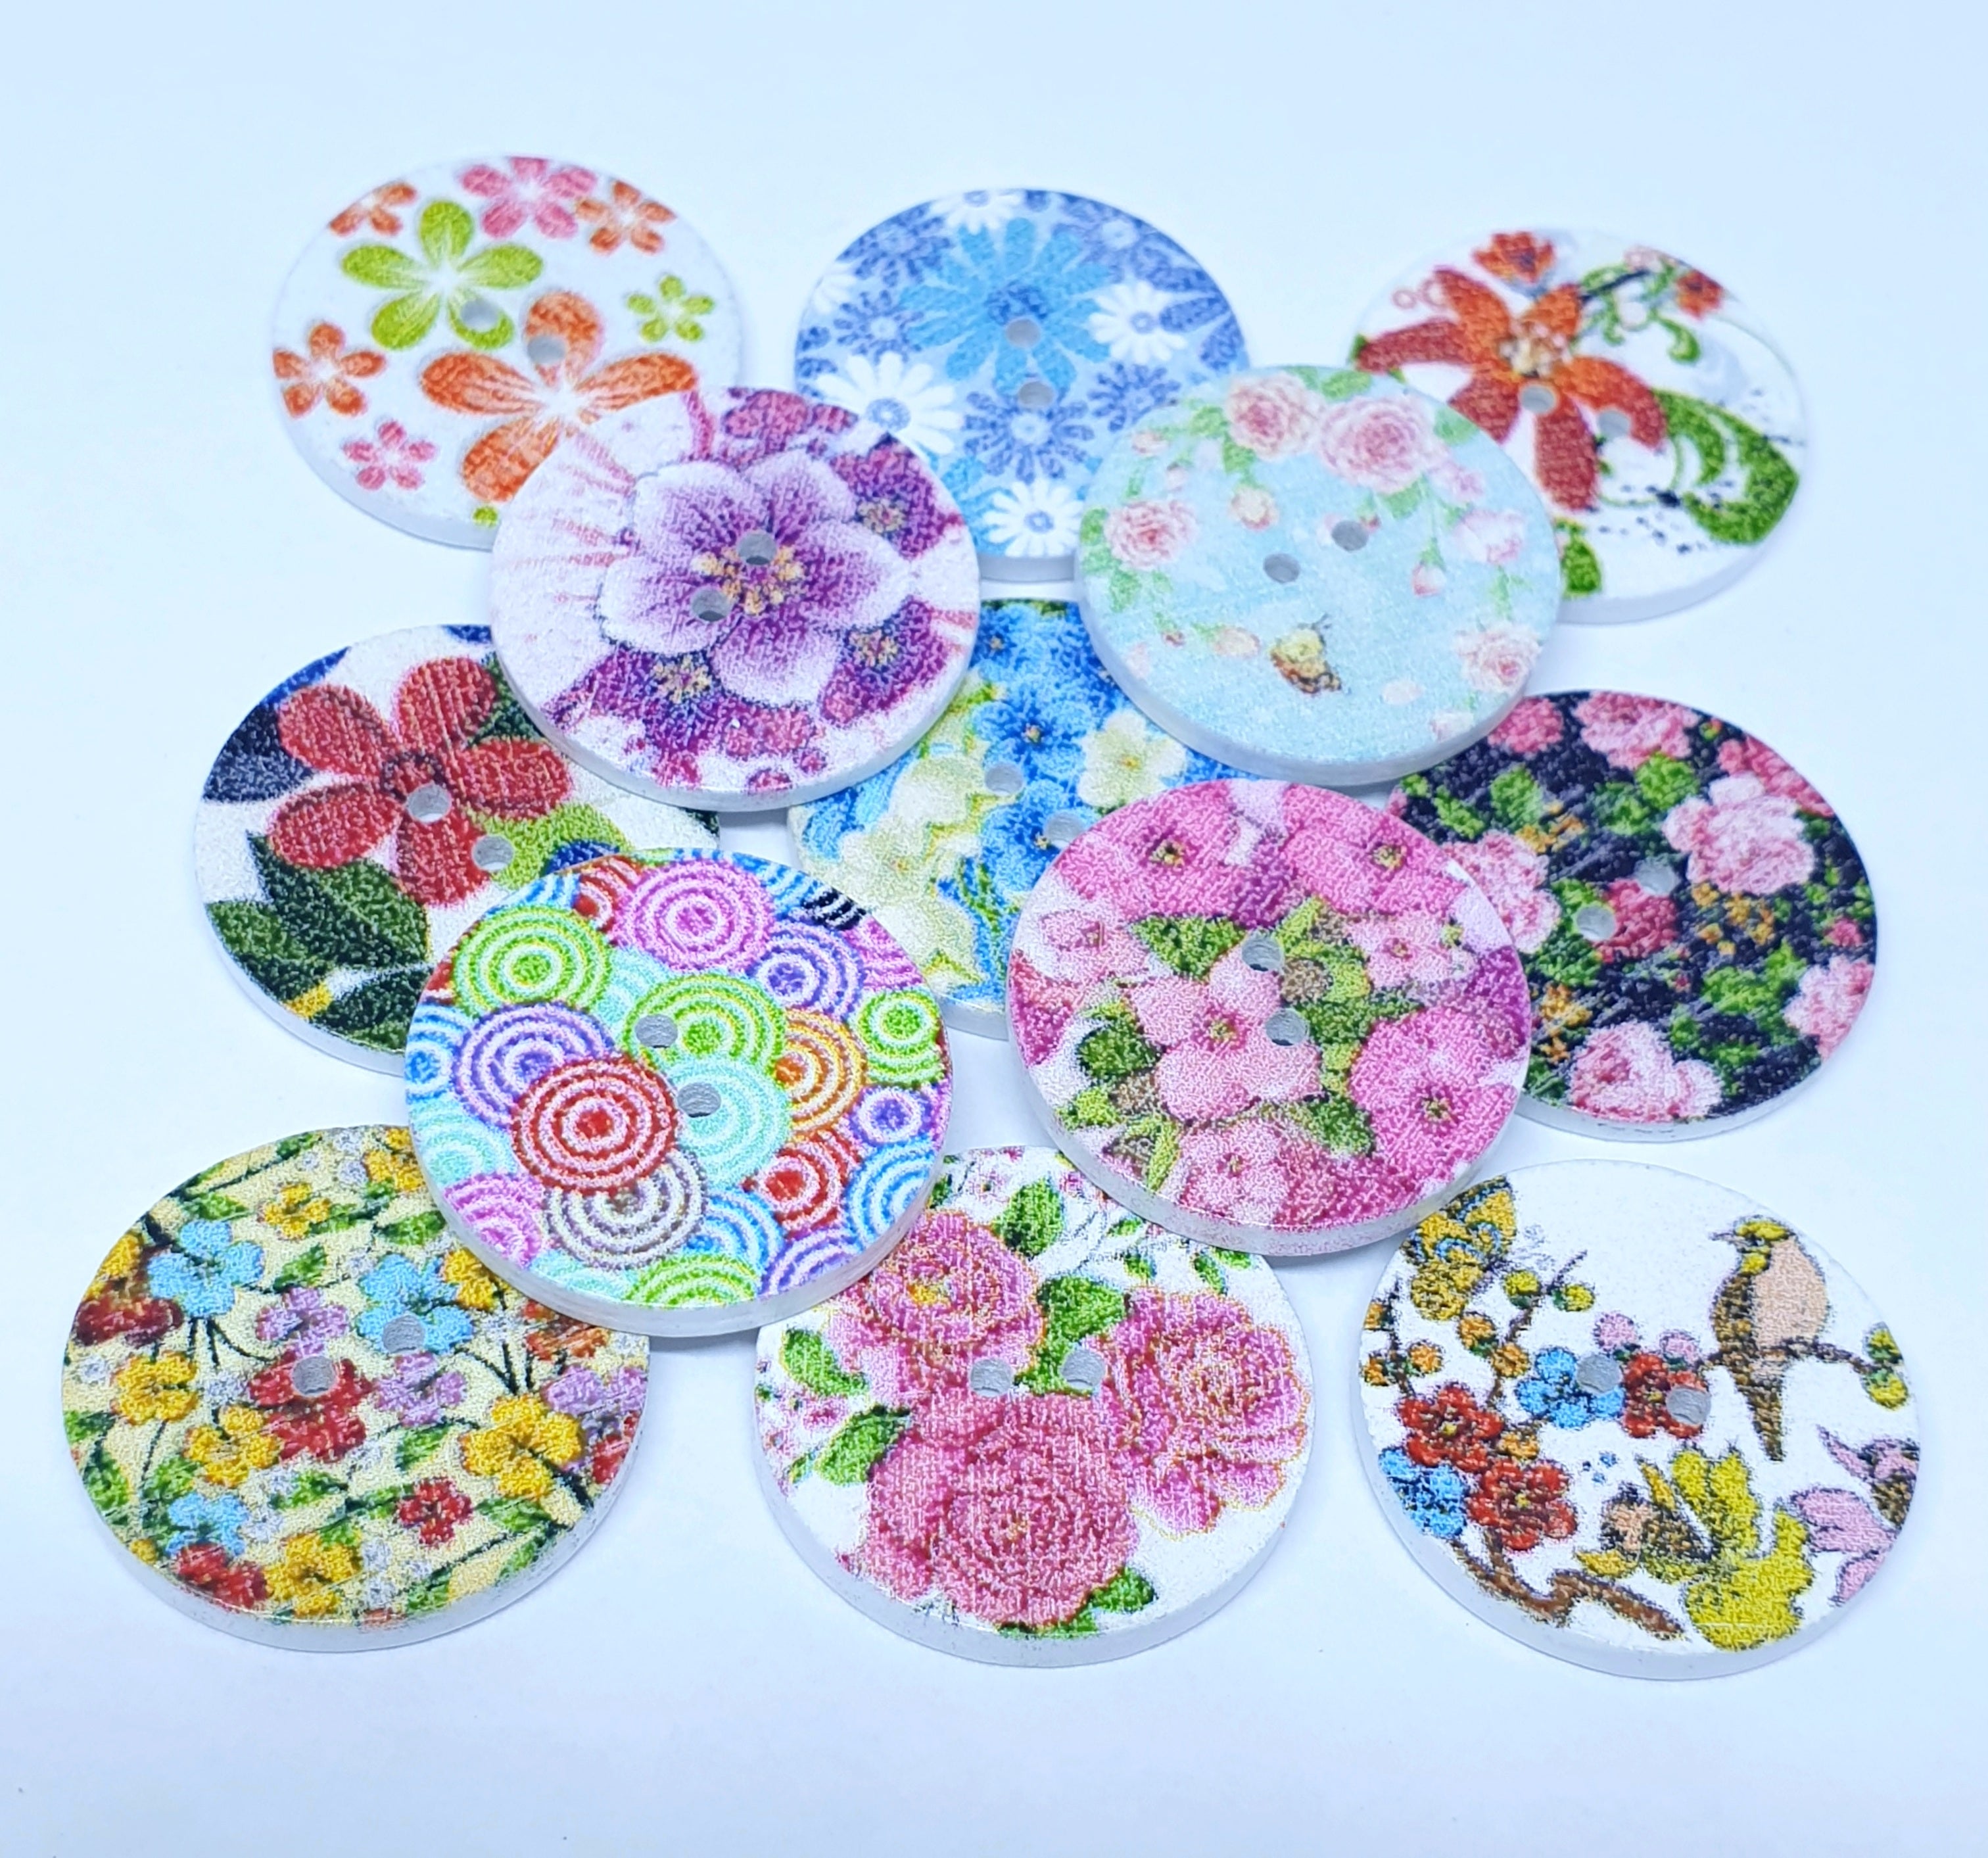 MajorCrafts 24pcs 25mm Mixed Flower Pattern 2 Holes Round Wooden Sewing Buttons